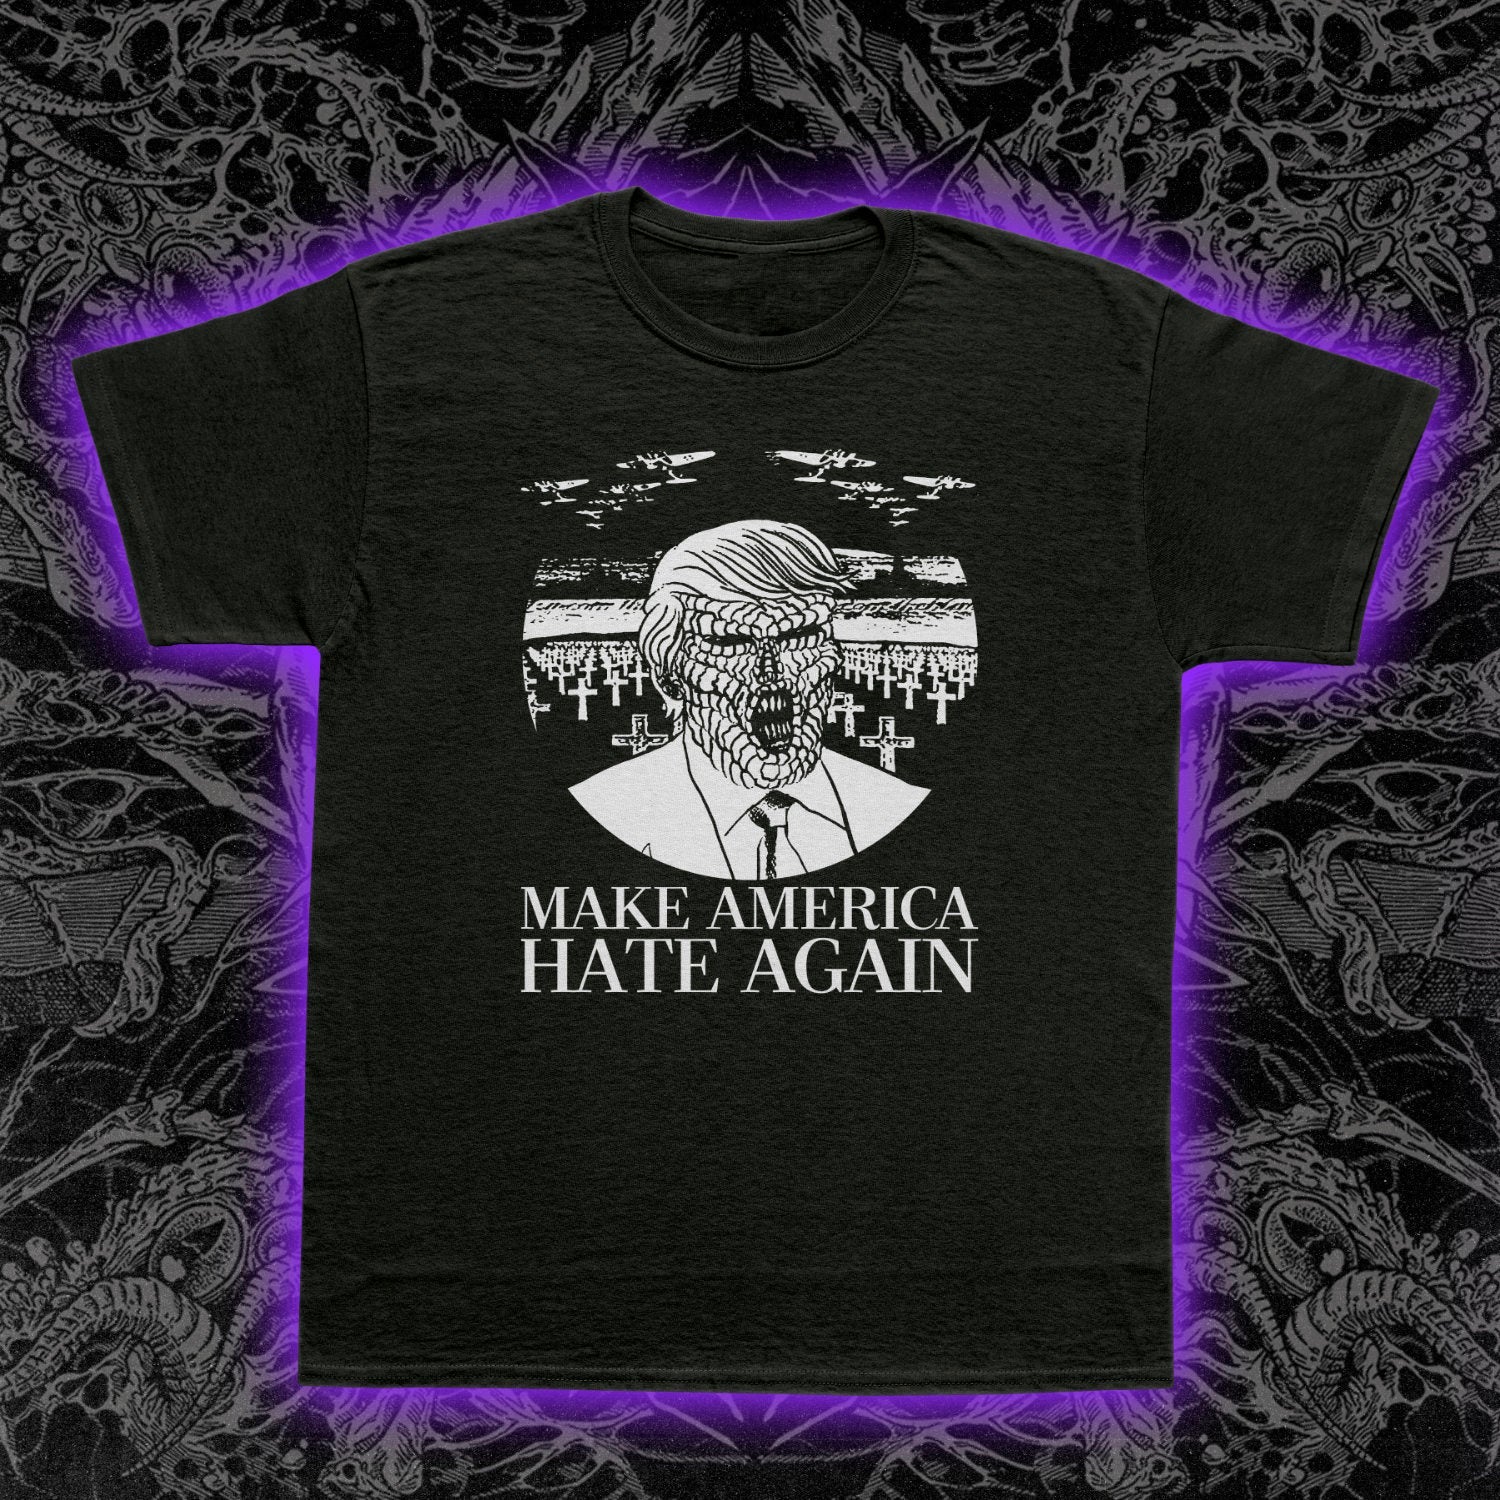 Make America Hate Again, Occult & Obscure Clothing